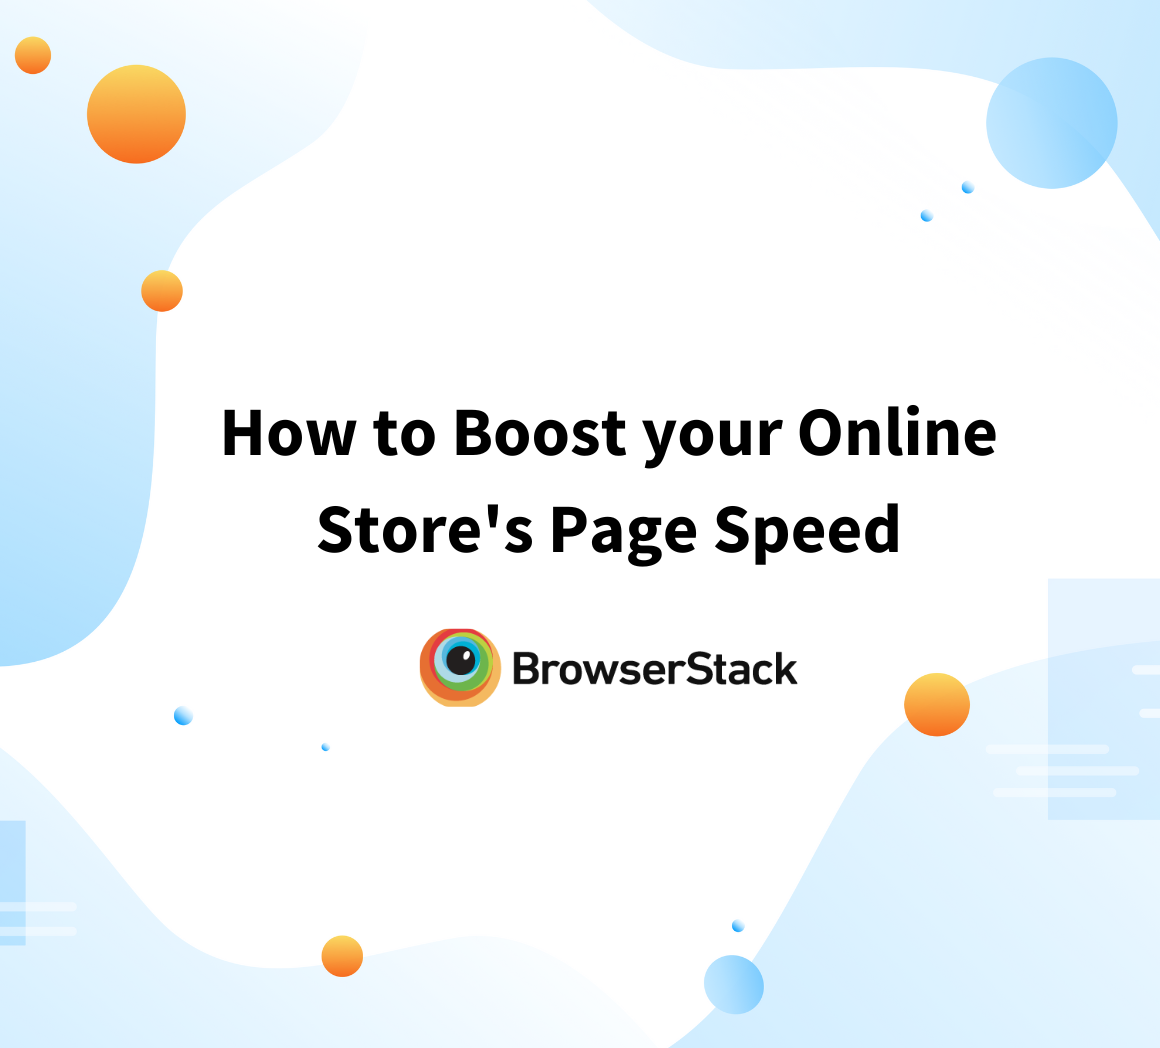 How to Boost your Online Store's Page Speed